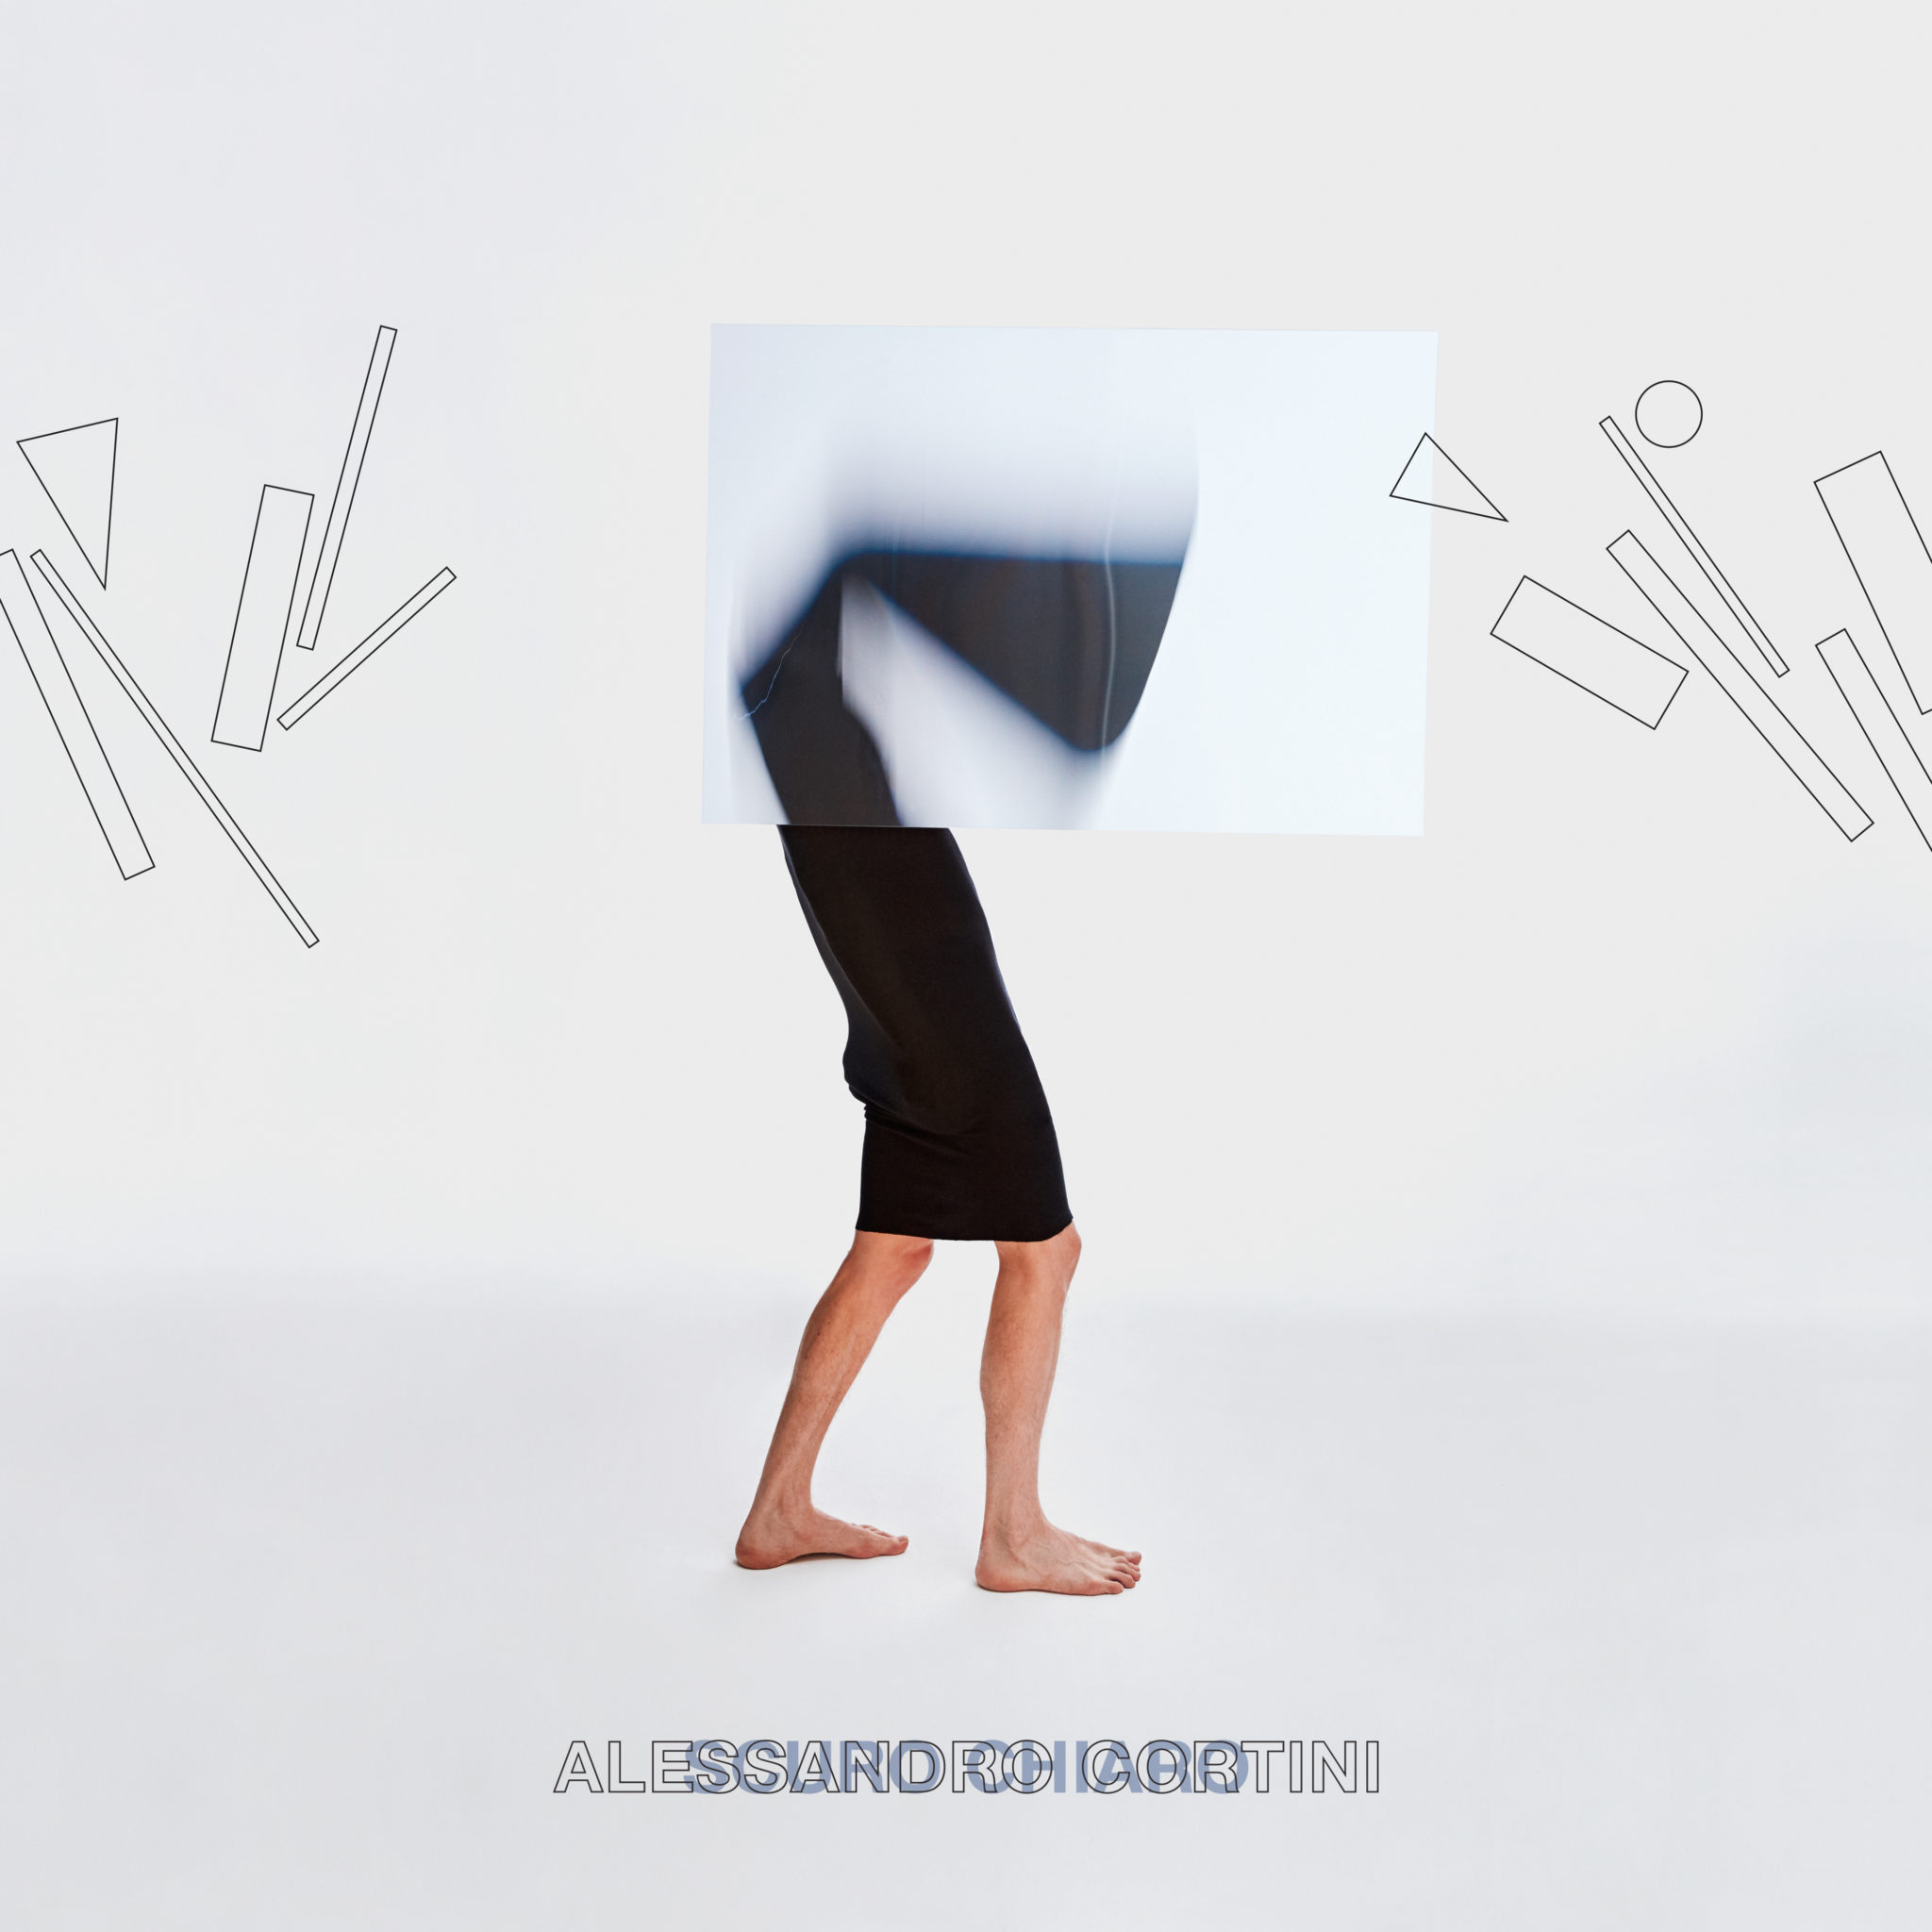 Alessandro Cortini is Back with More “Kaleidoscopic Melancholia”